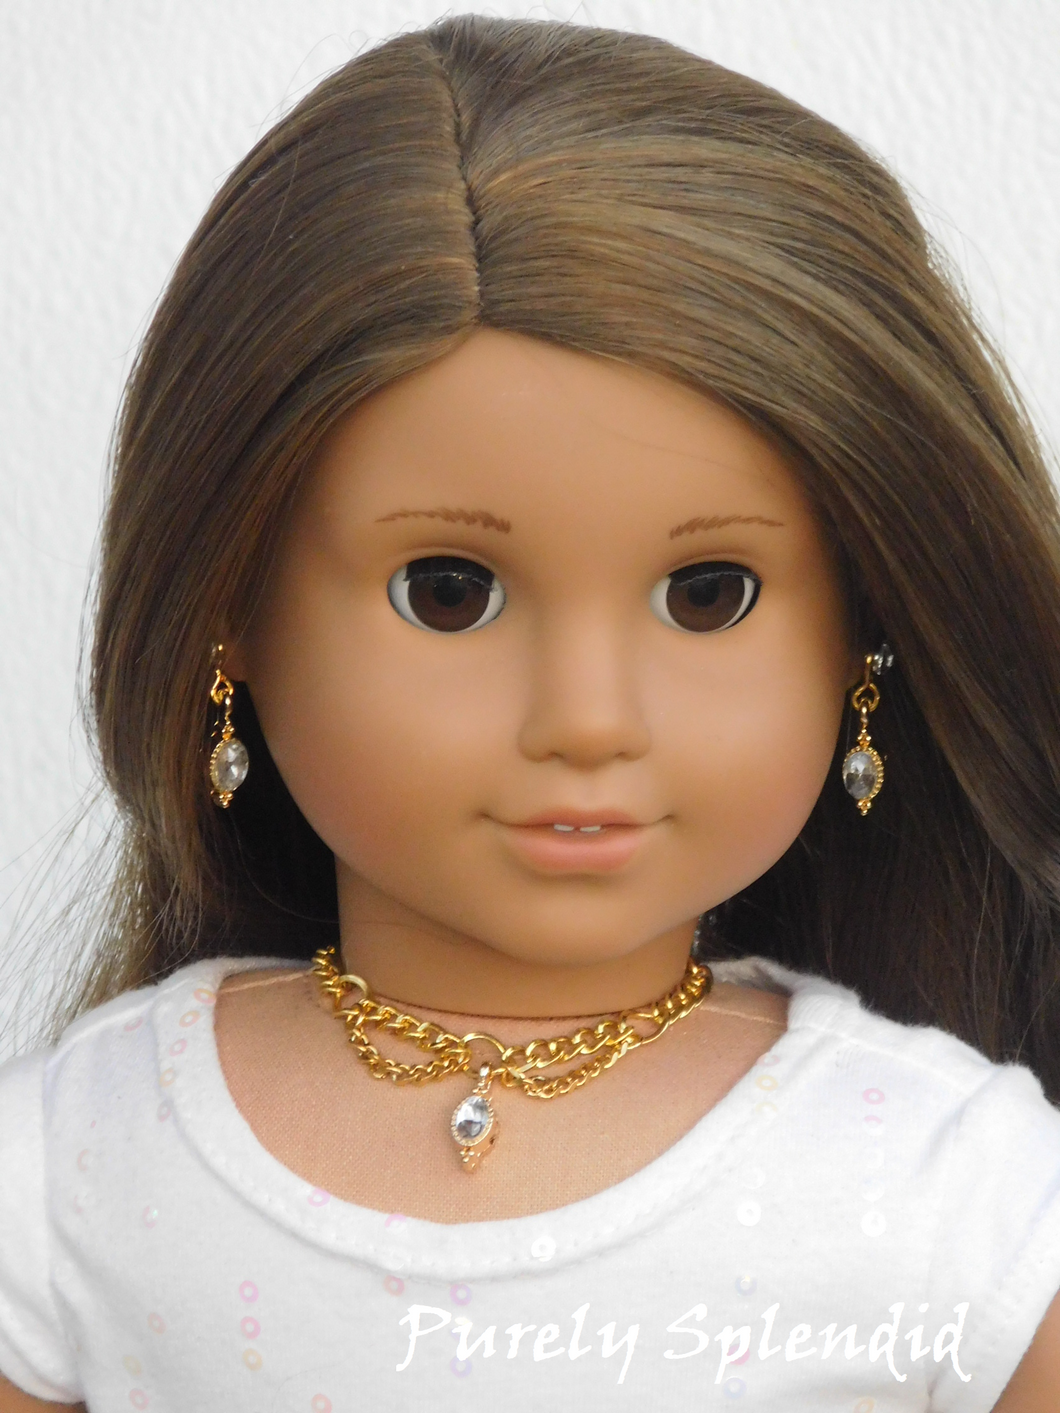 18 inch doll shown wearing Gold Chain Choker Necklace and Earrings